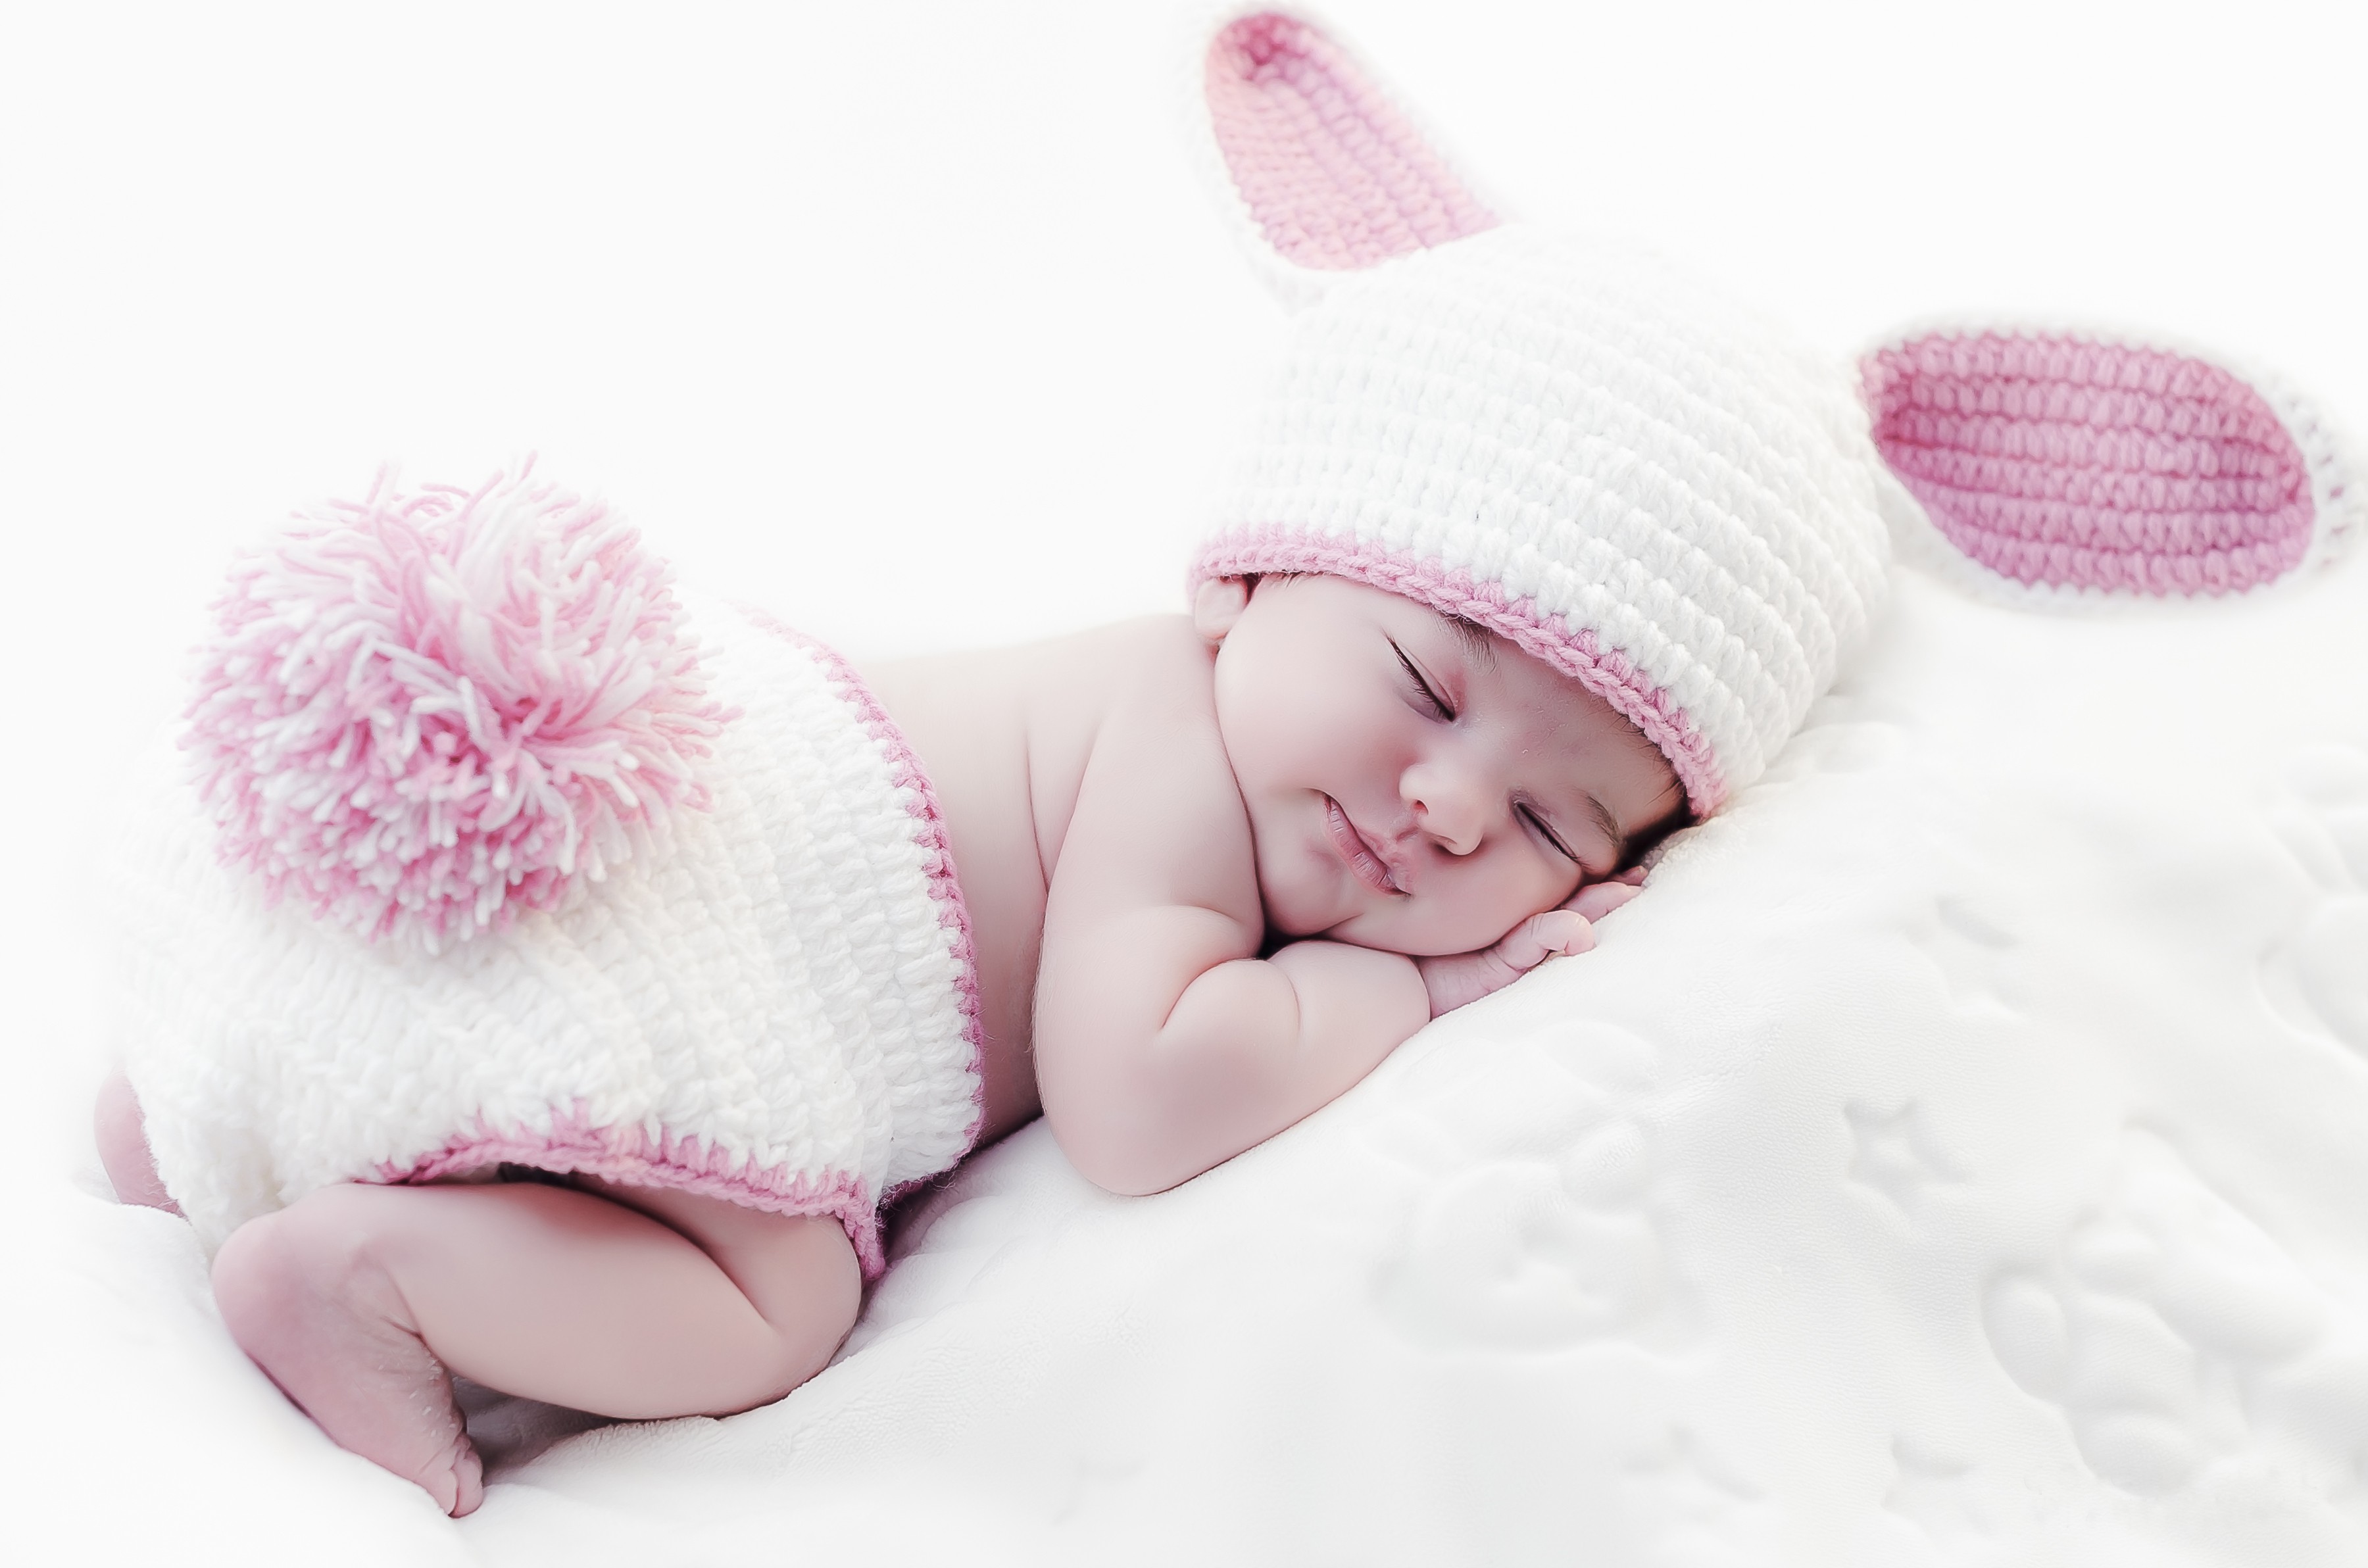 baby photos wallpapers,child,baby,pink,photograph,beanie